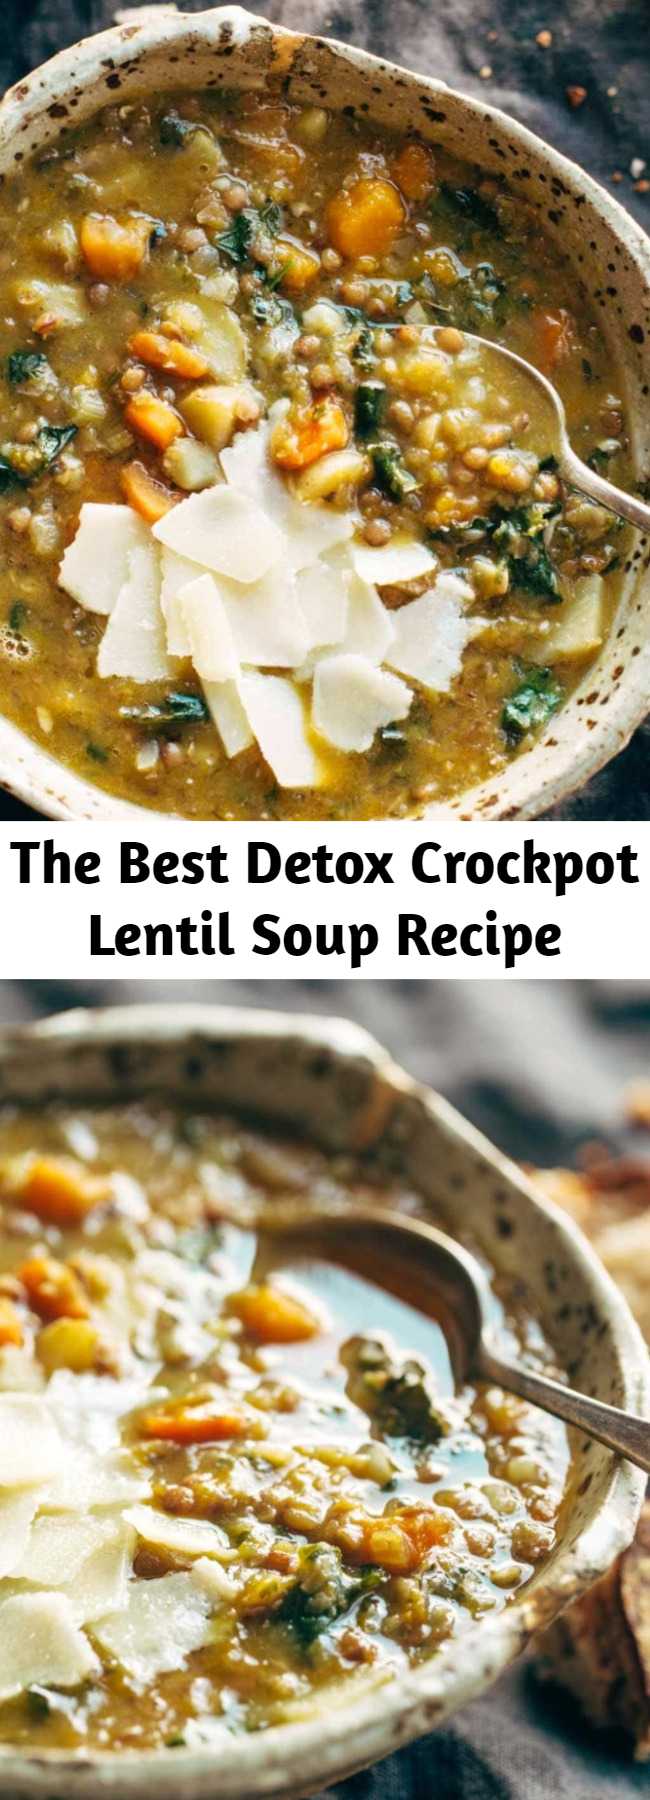 The Best Detox Crockpot Lentil Soup Recipe - Detox Crockpot Lentil Soup – a clean and simple soup made with onions, garlic, carrots, olive oil, squash, and LENTILS! Super healthy and easy to make. Vegan / vegetarian / gluten free and SUPER delicious! #soup #slowcooker #detox #lentils #kale #vegan #vegetarian